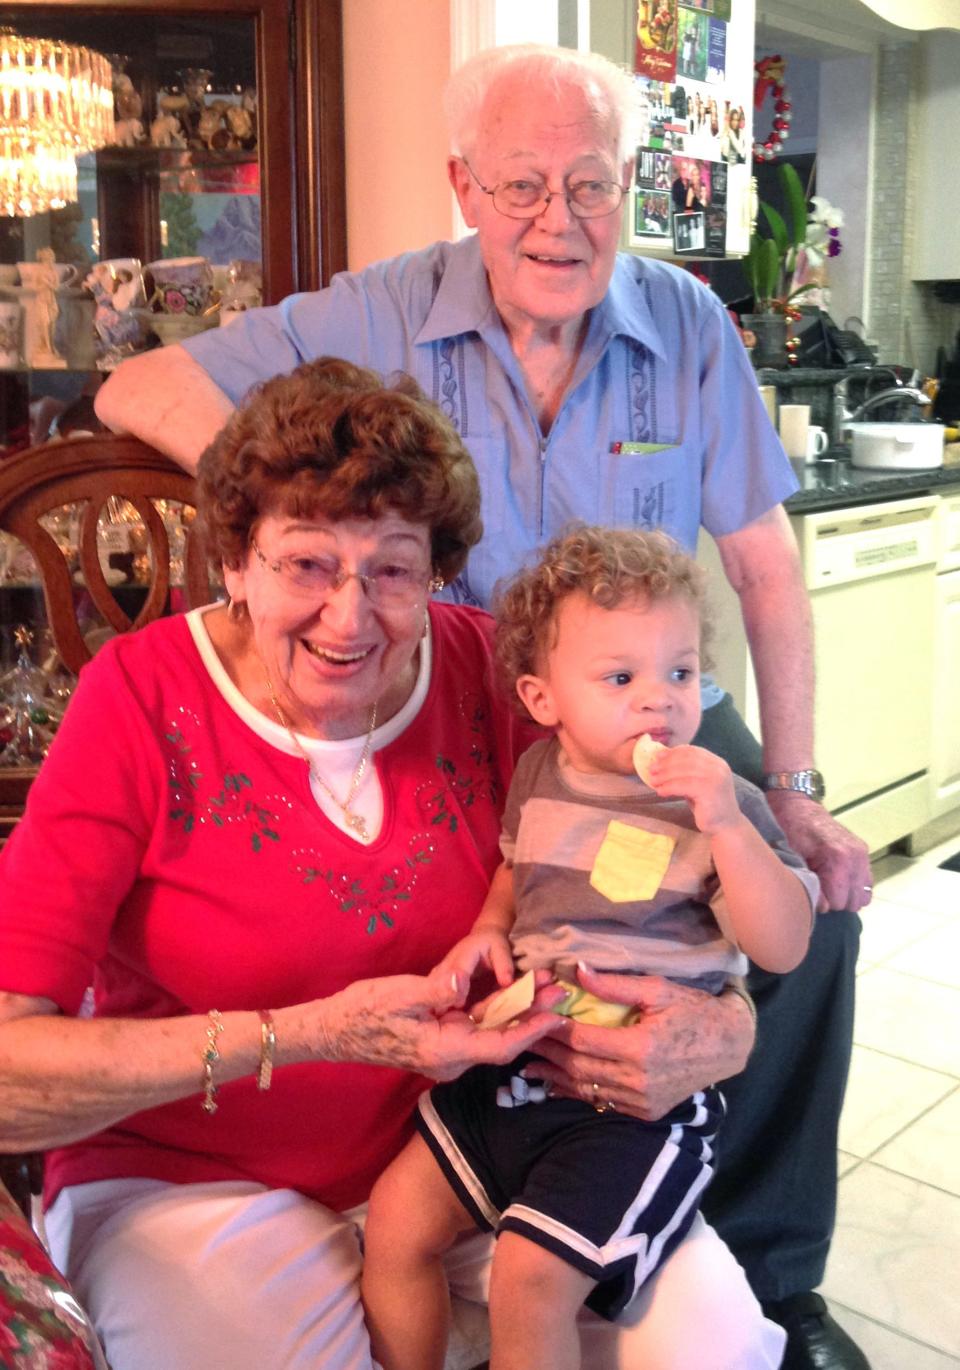 Anna and Spencer Meckstroth pose with Haydon, one of their great-grandchildren, in their collectible-filled living room.